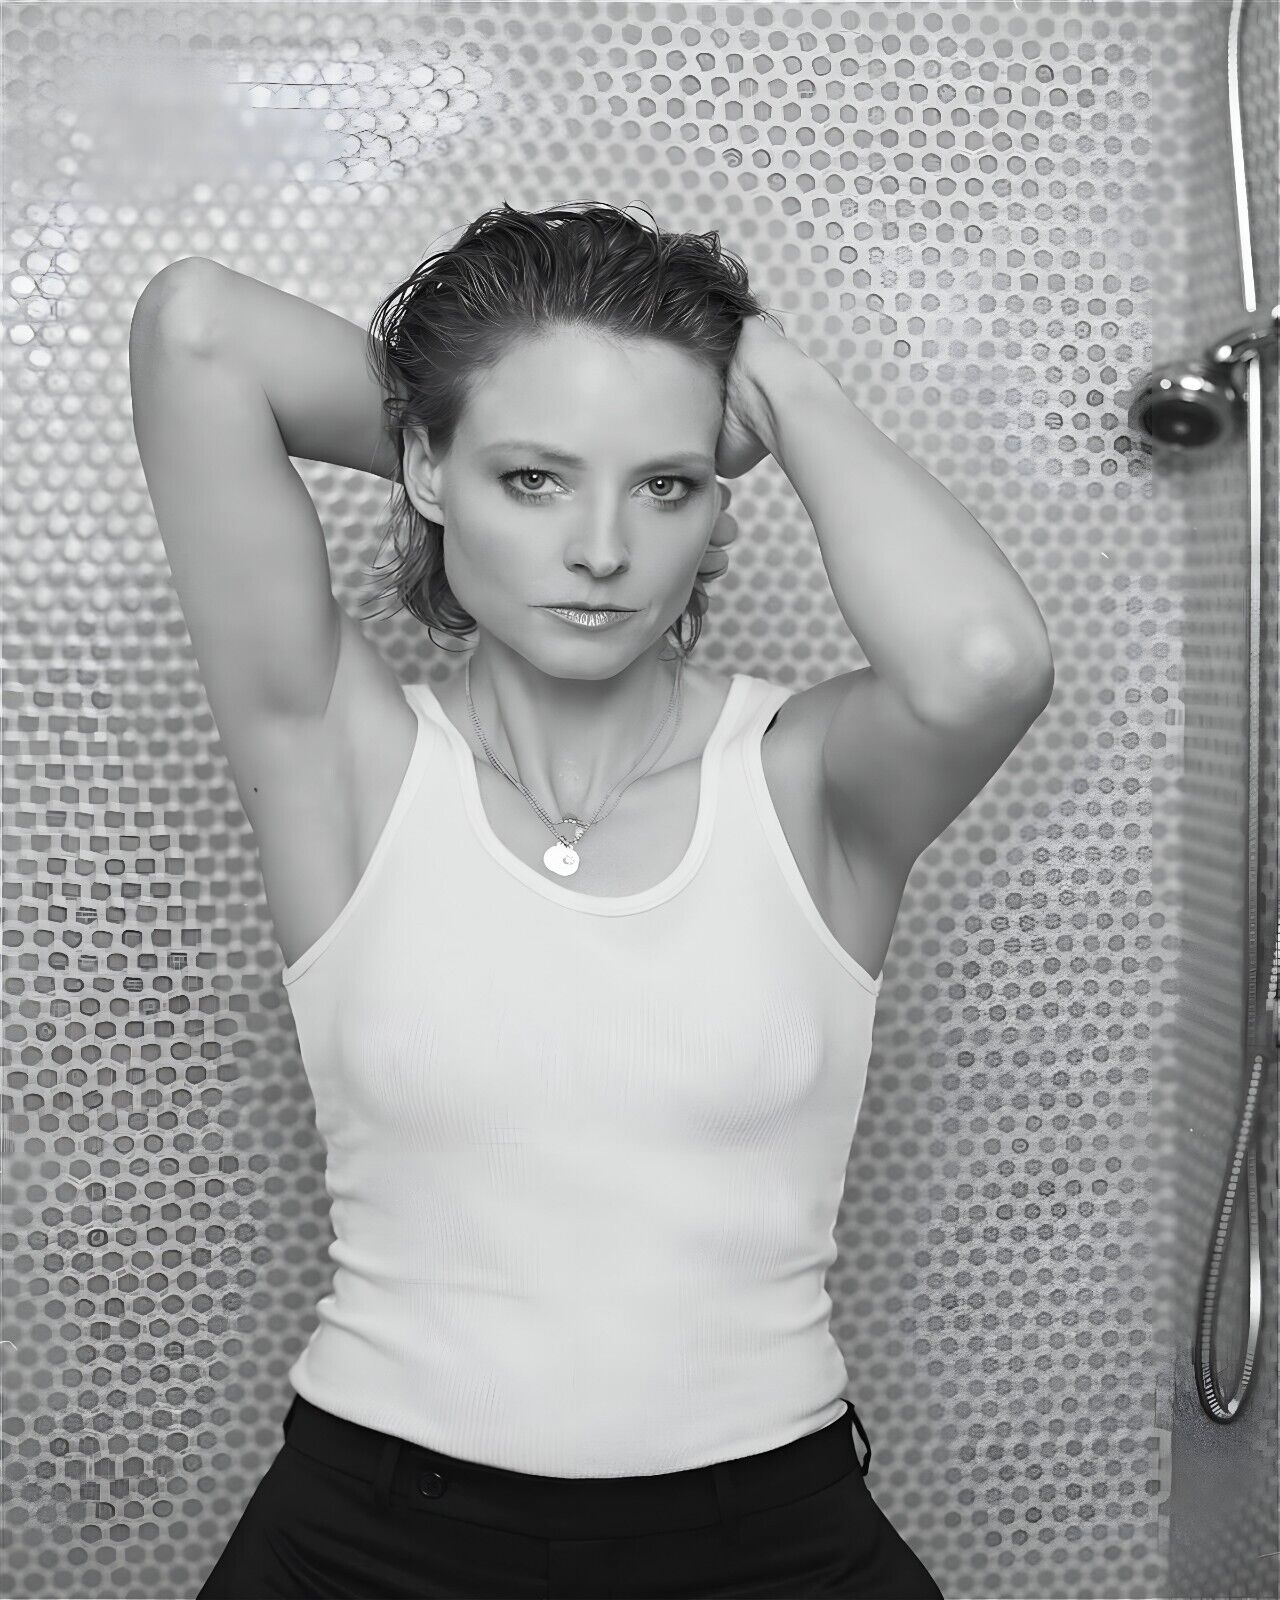 Jodie Foster 8 x 10 Photograph Art Print Photo Picture